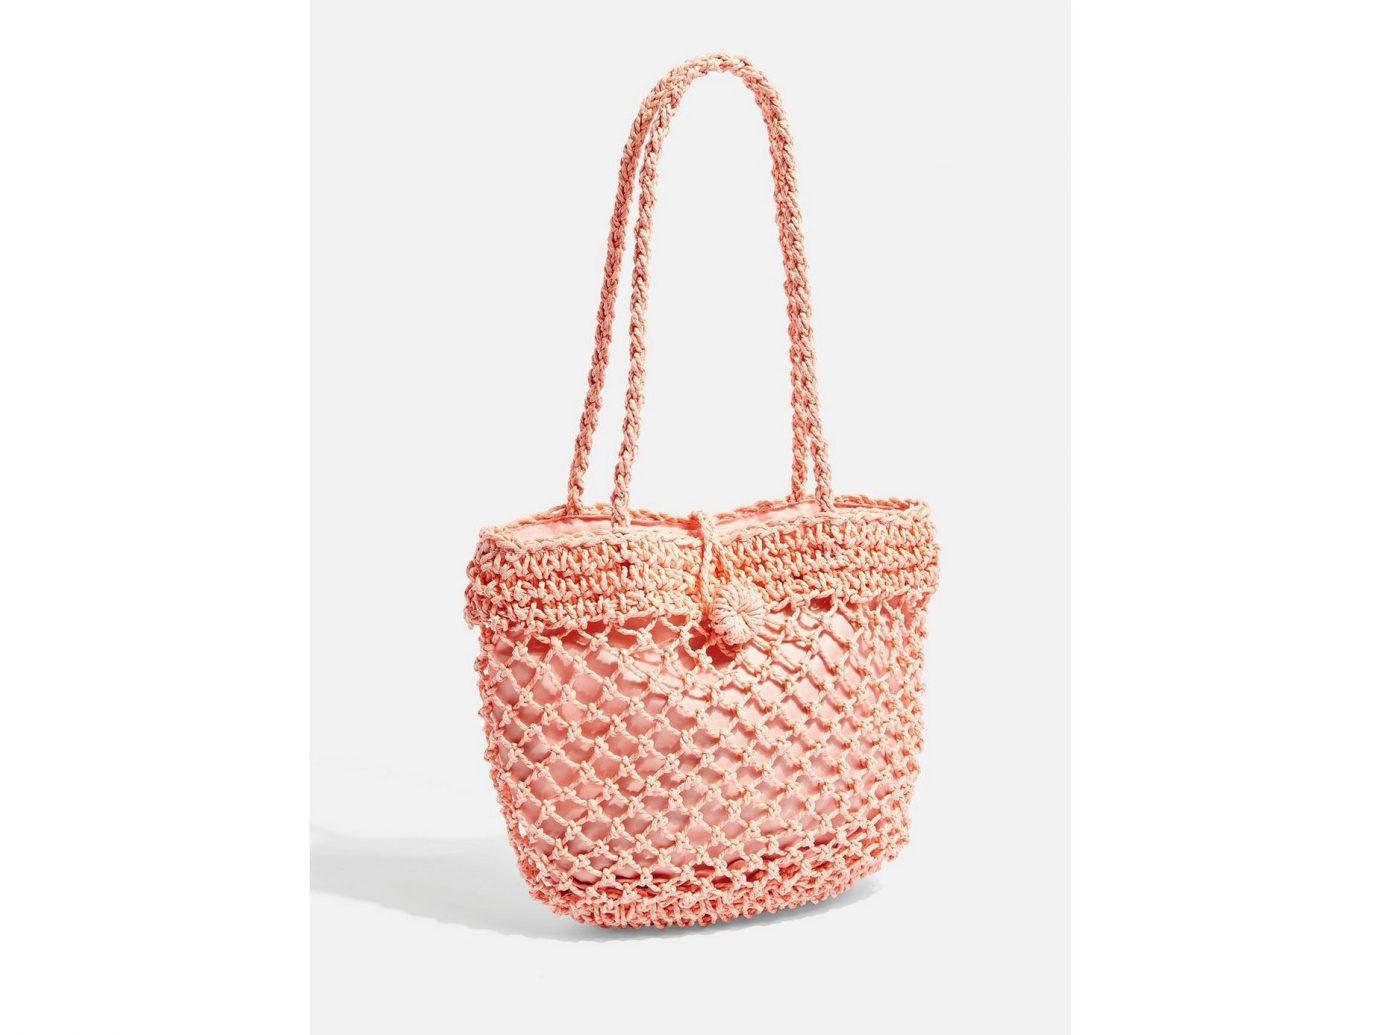 Topshop FIZZLE Pink Straw Tote Bag